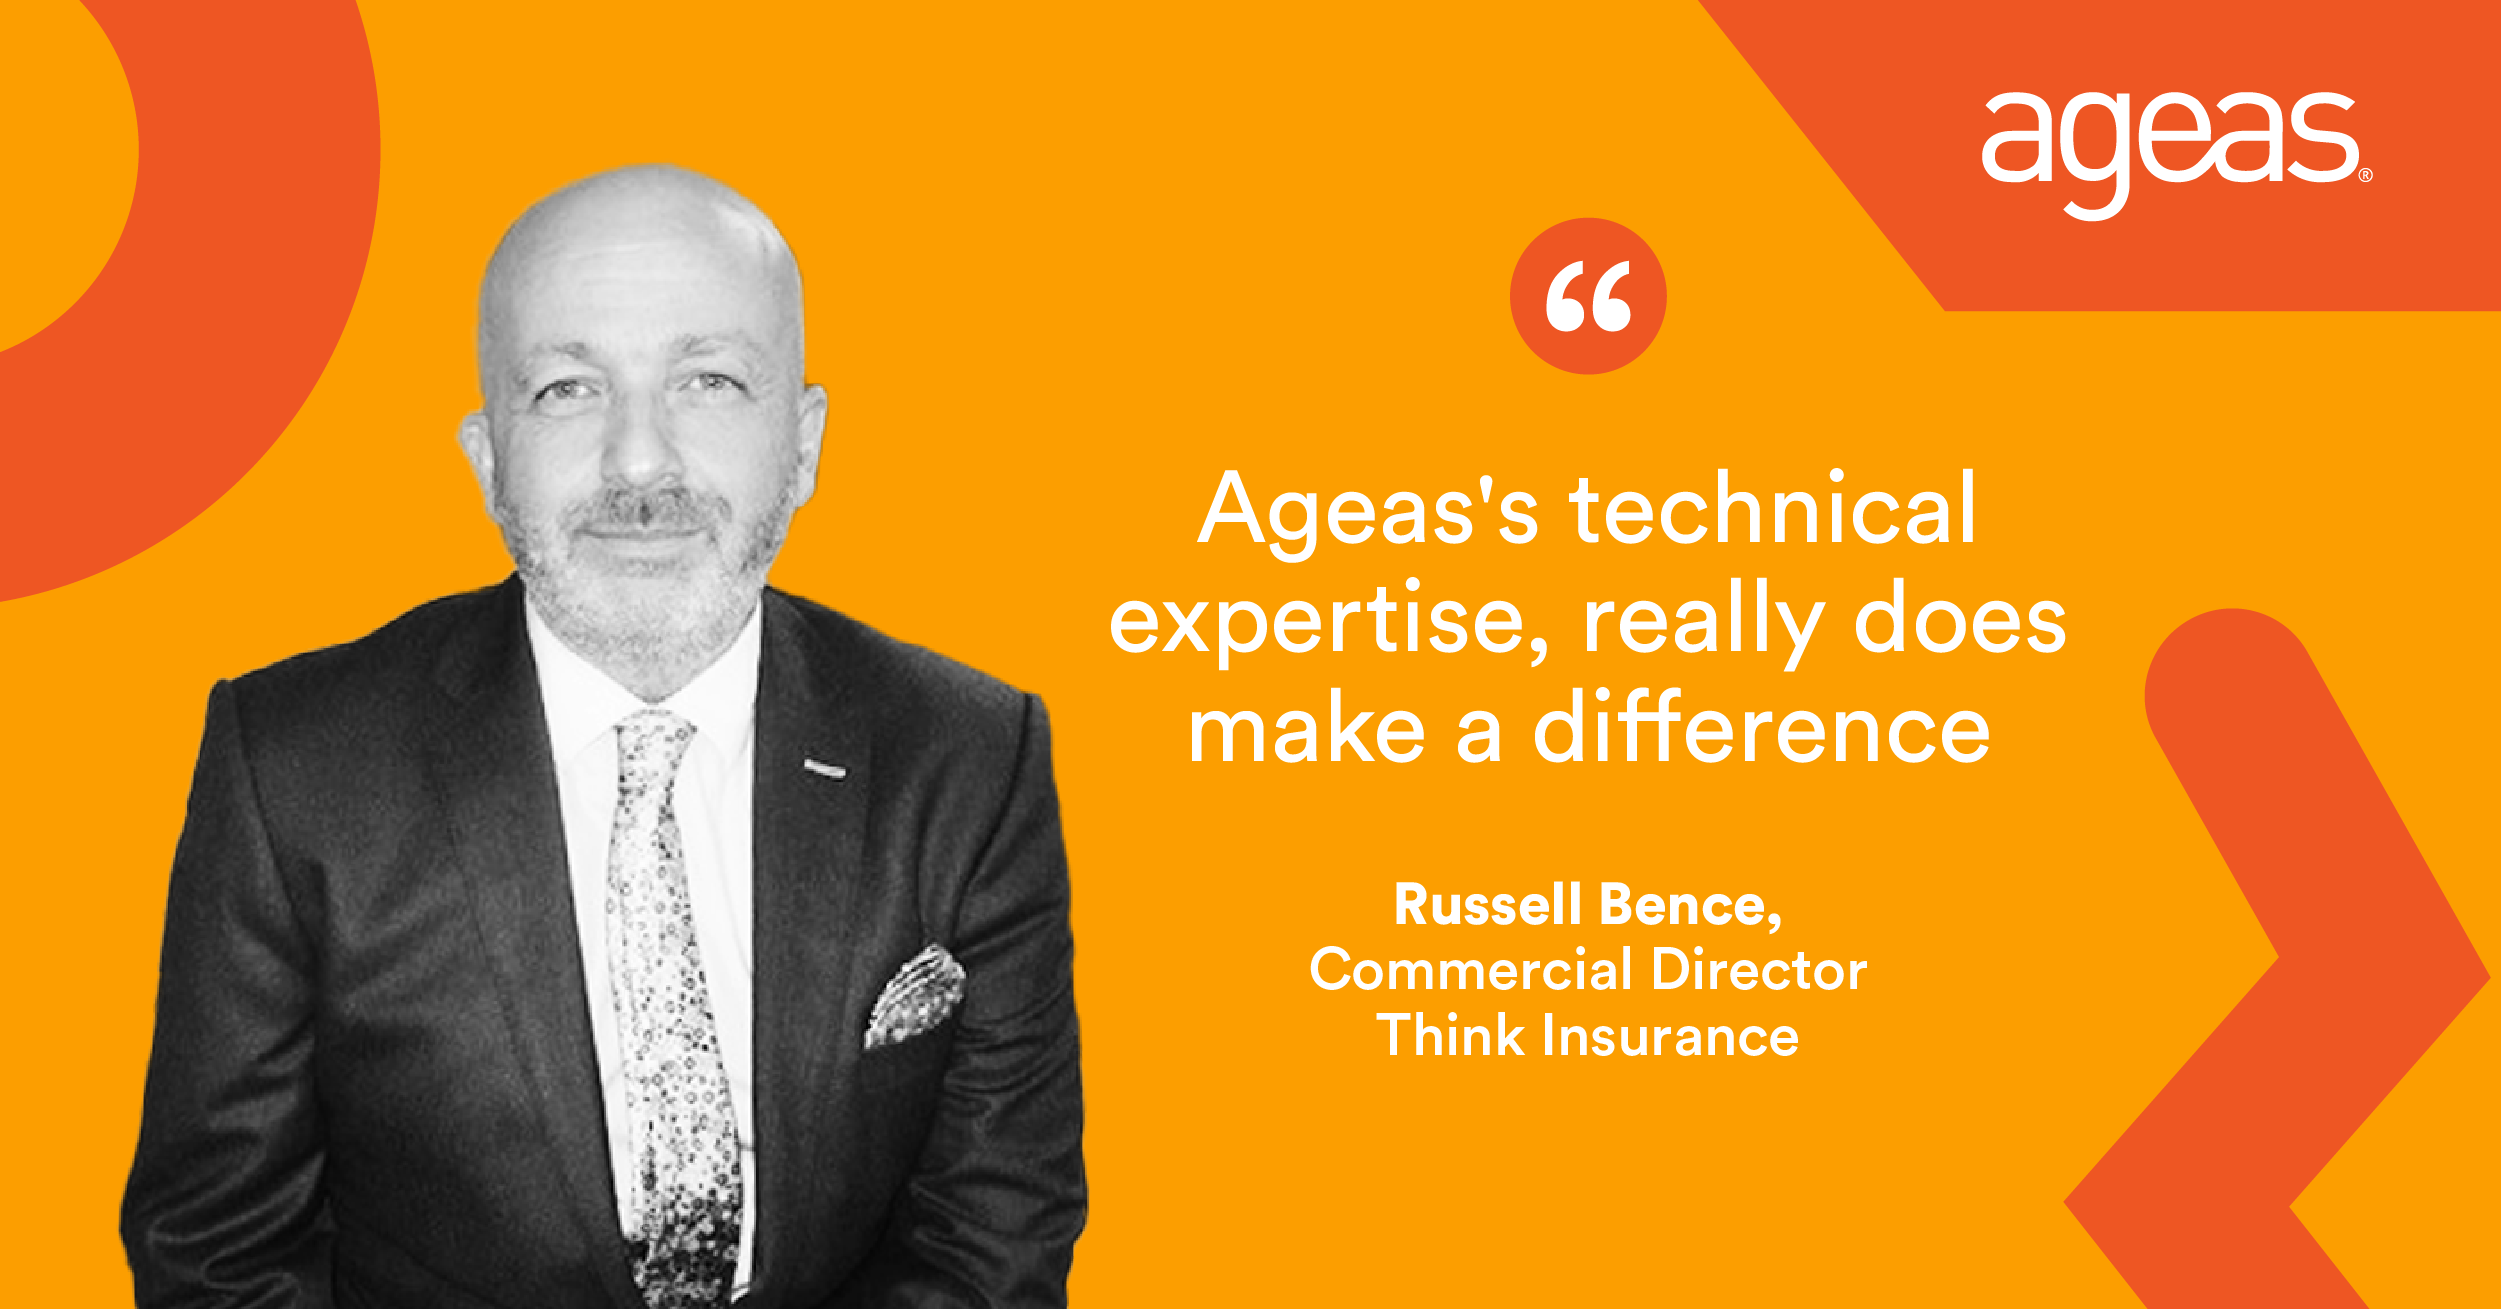 Image of Russell Bence, Commercial Director at Think Insurance